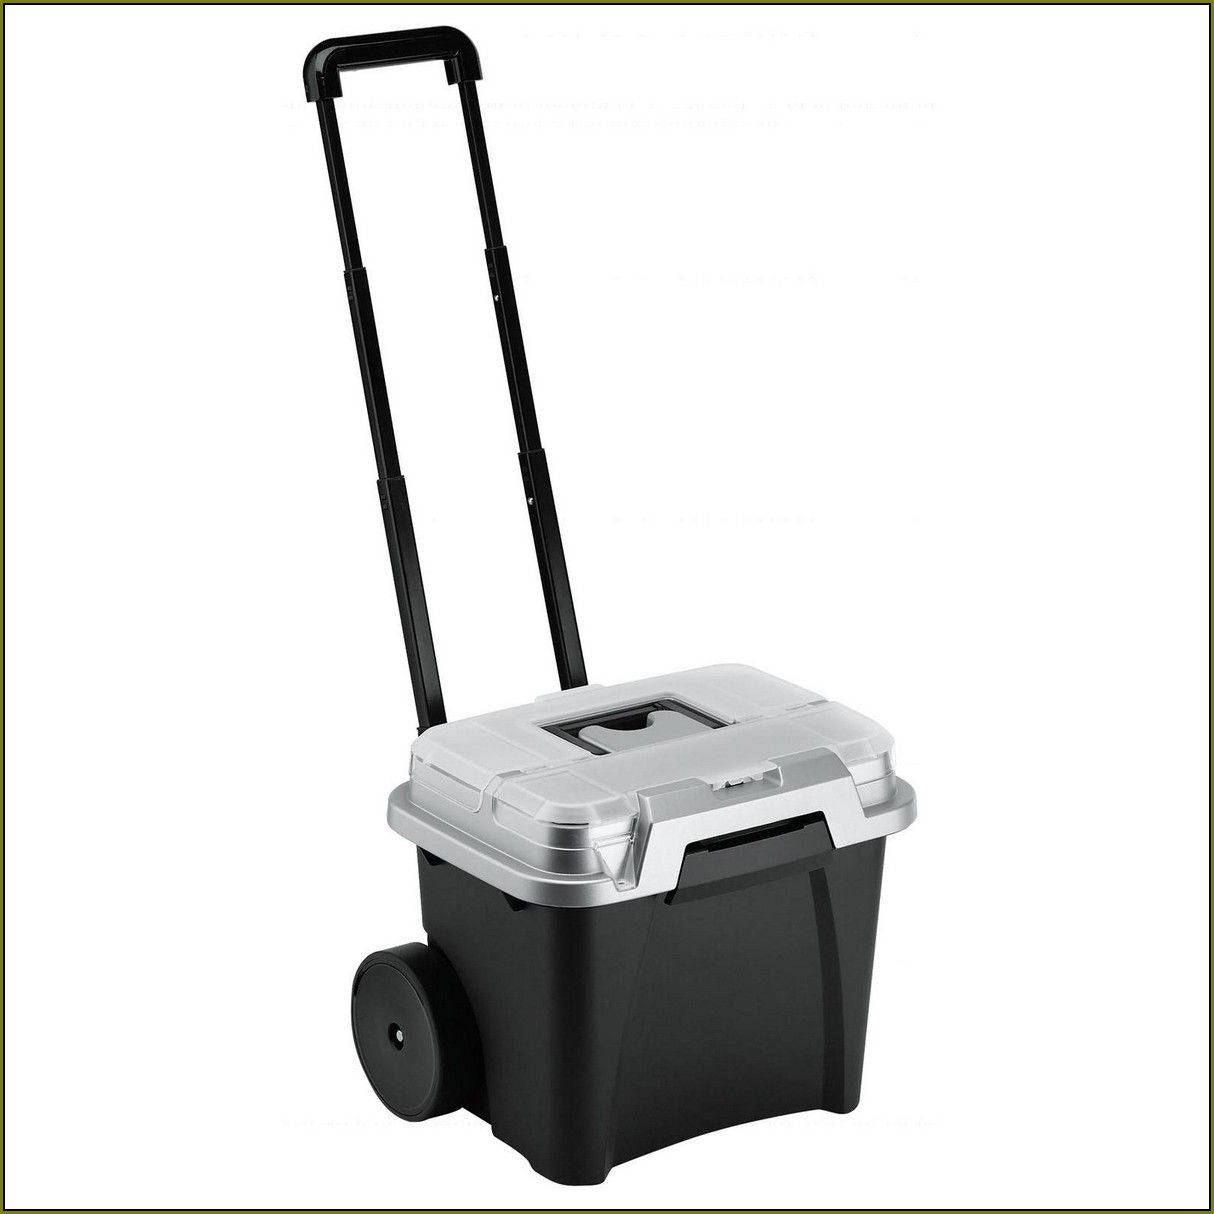 Portable Filing Cabinet On Wheels The Need For Structured Storage inside dimensions 1214 X 1214